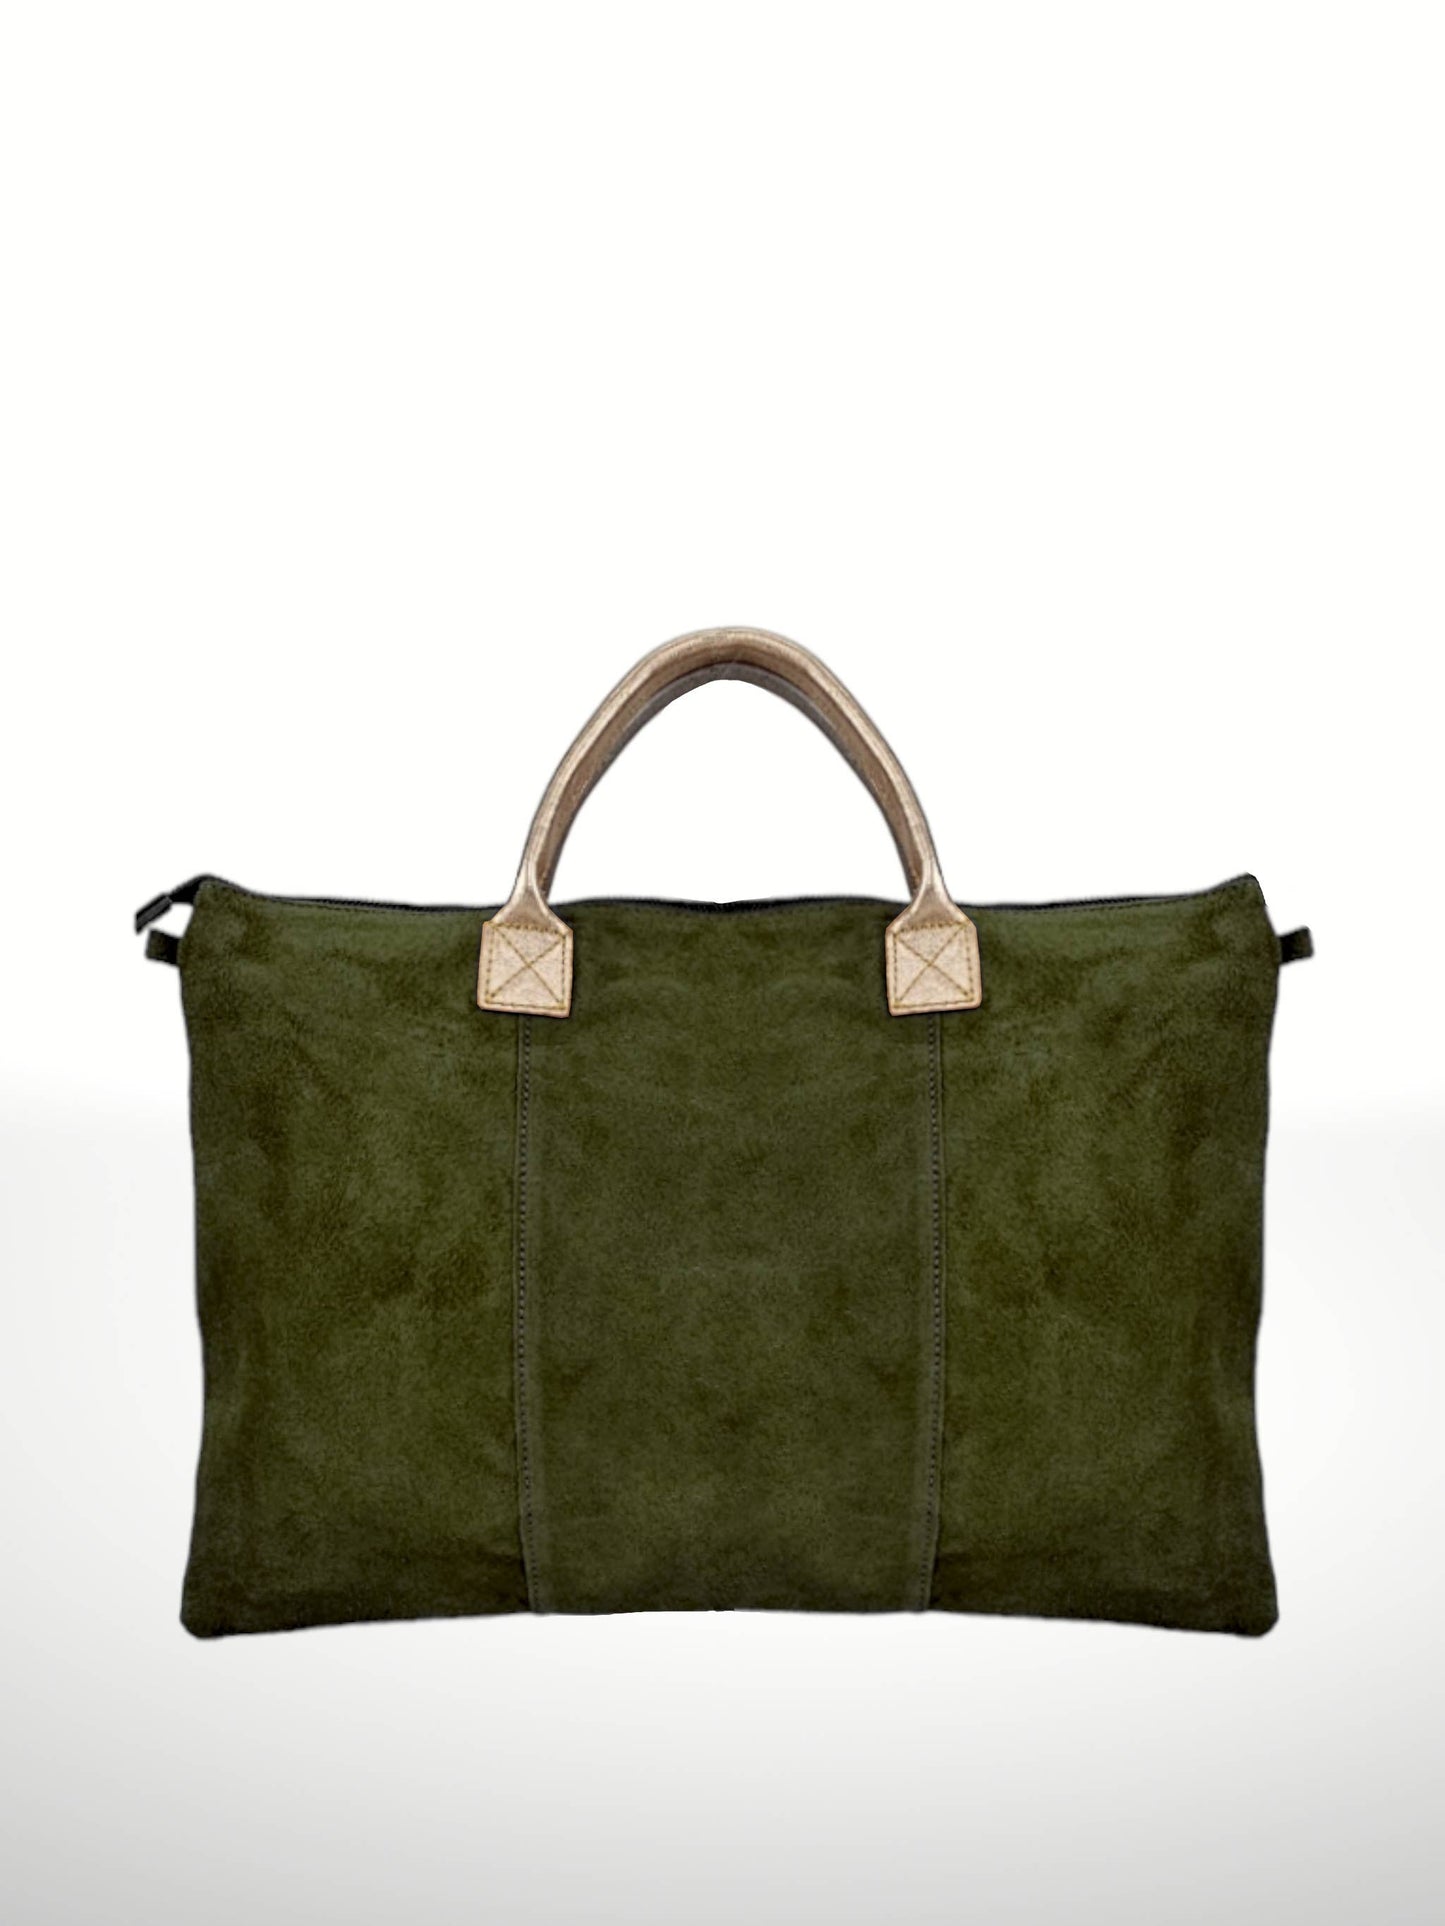 Milano met suede leather bags/: Olive